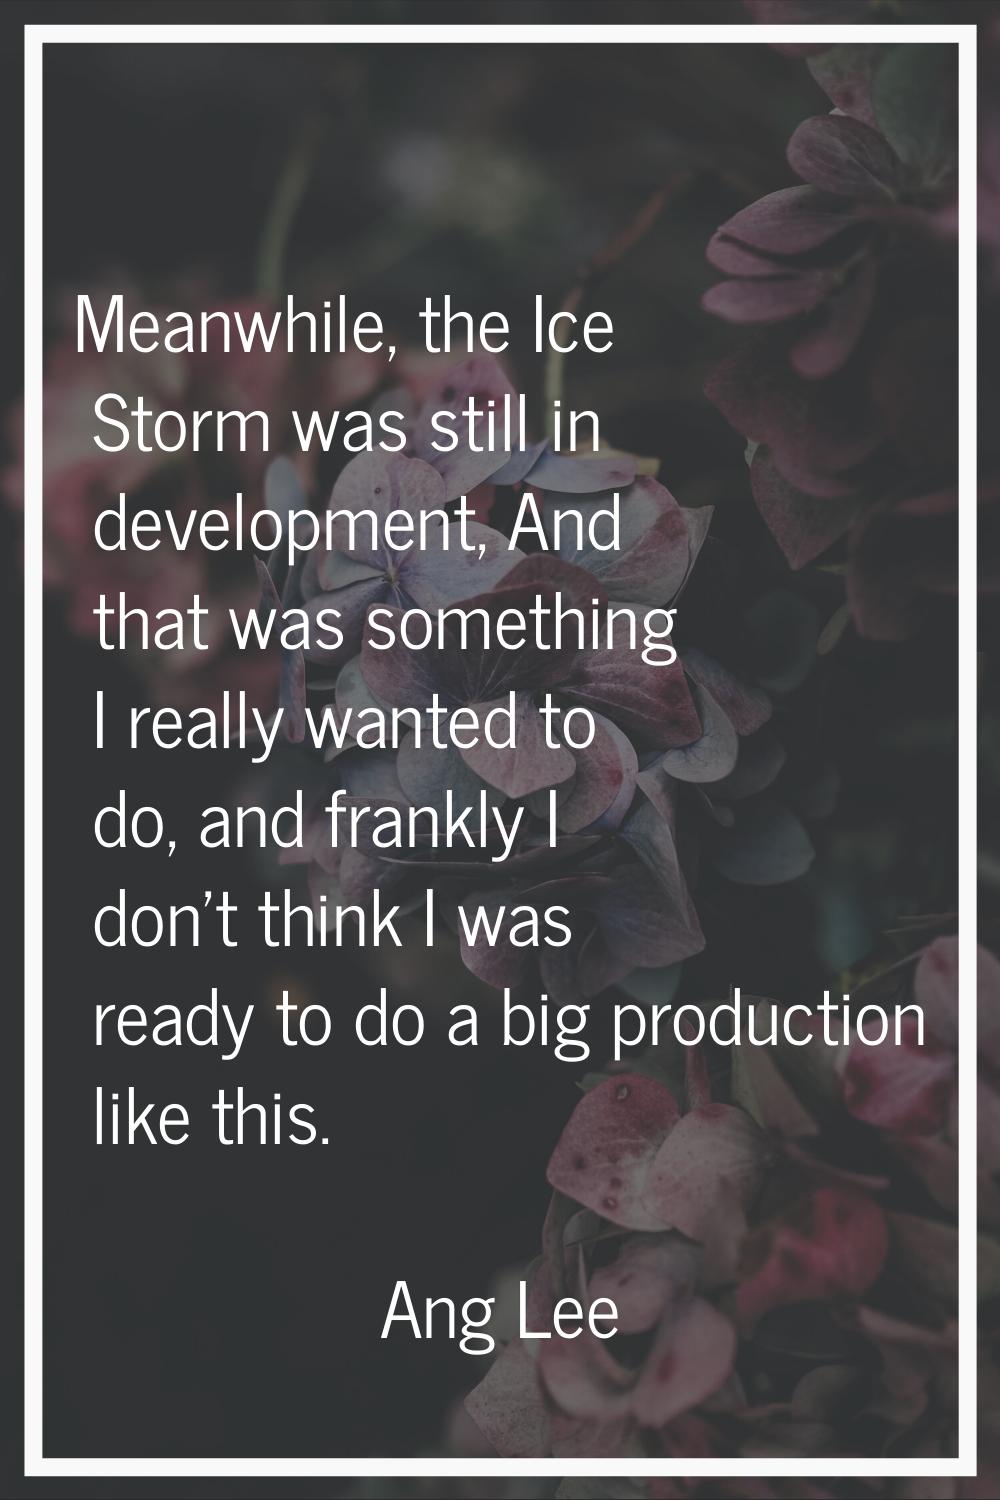 Meanwhile, the Ice Storm was still in development, And that was something I really wanted to do, an